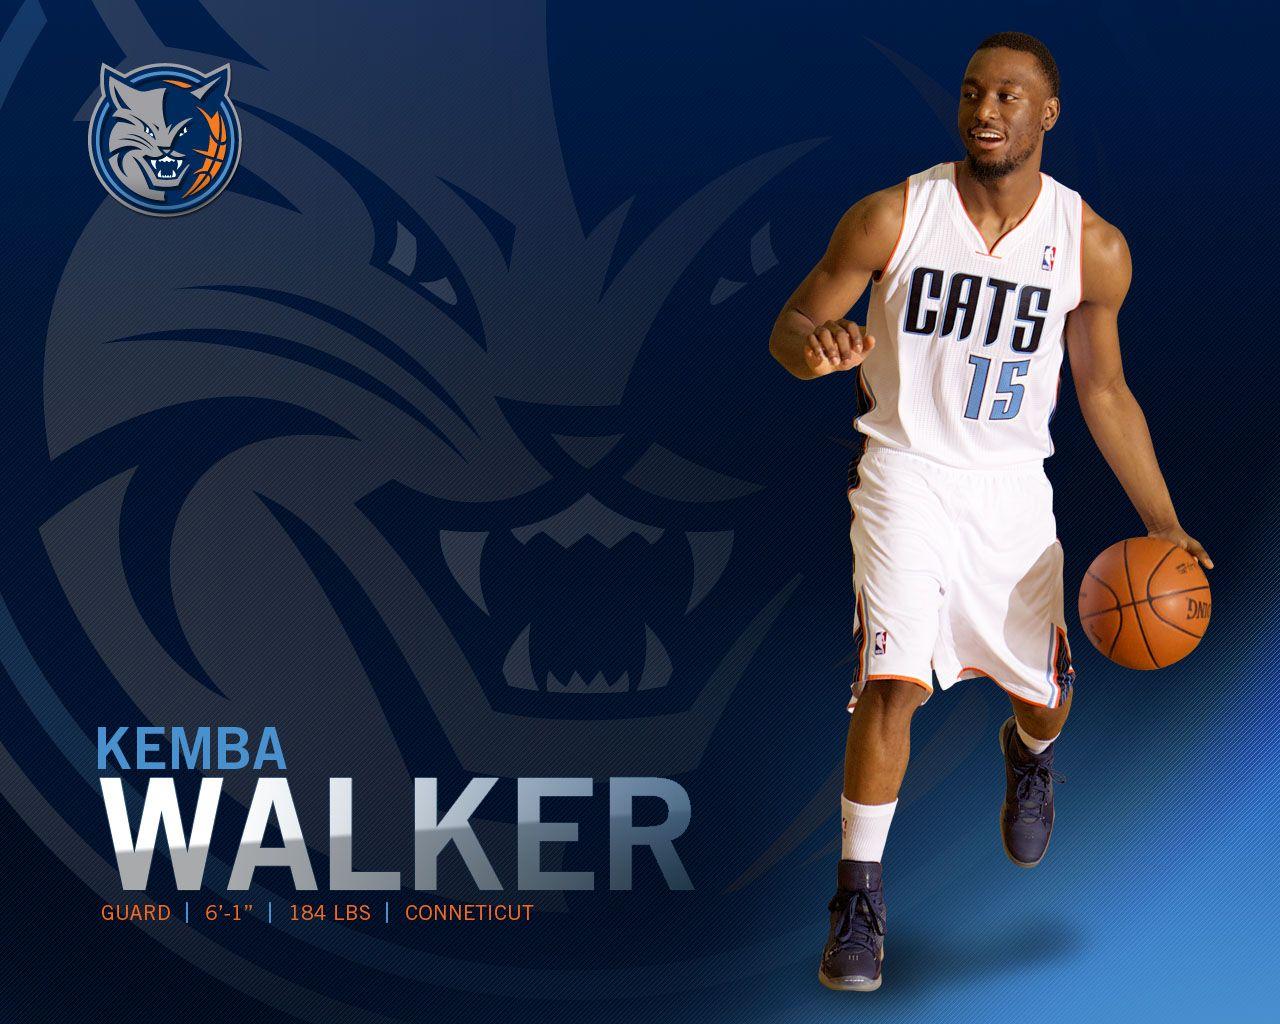 Charlotte Bobcats Desktop Wallpaper. THE OFFICIAL SITE OF THE